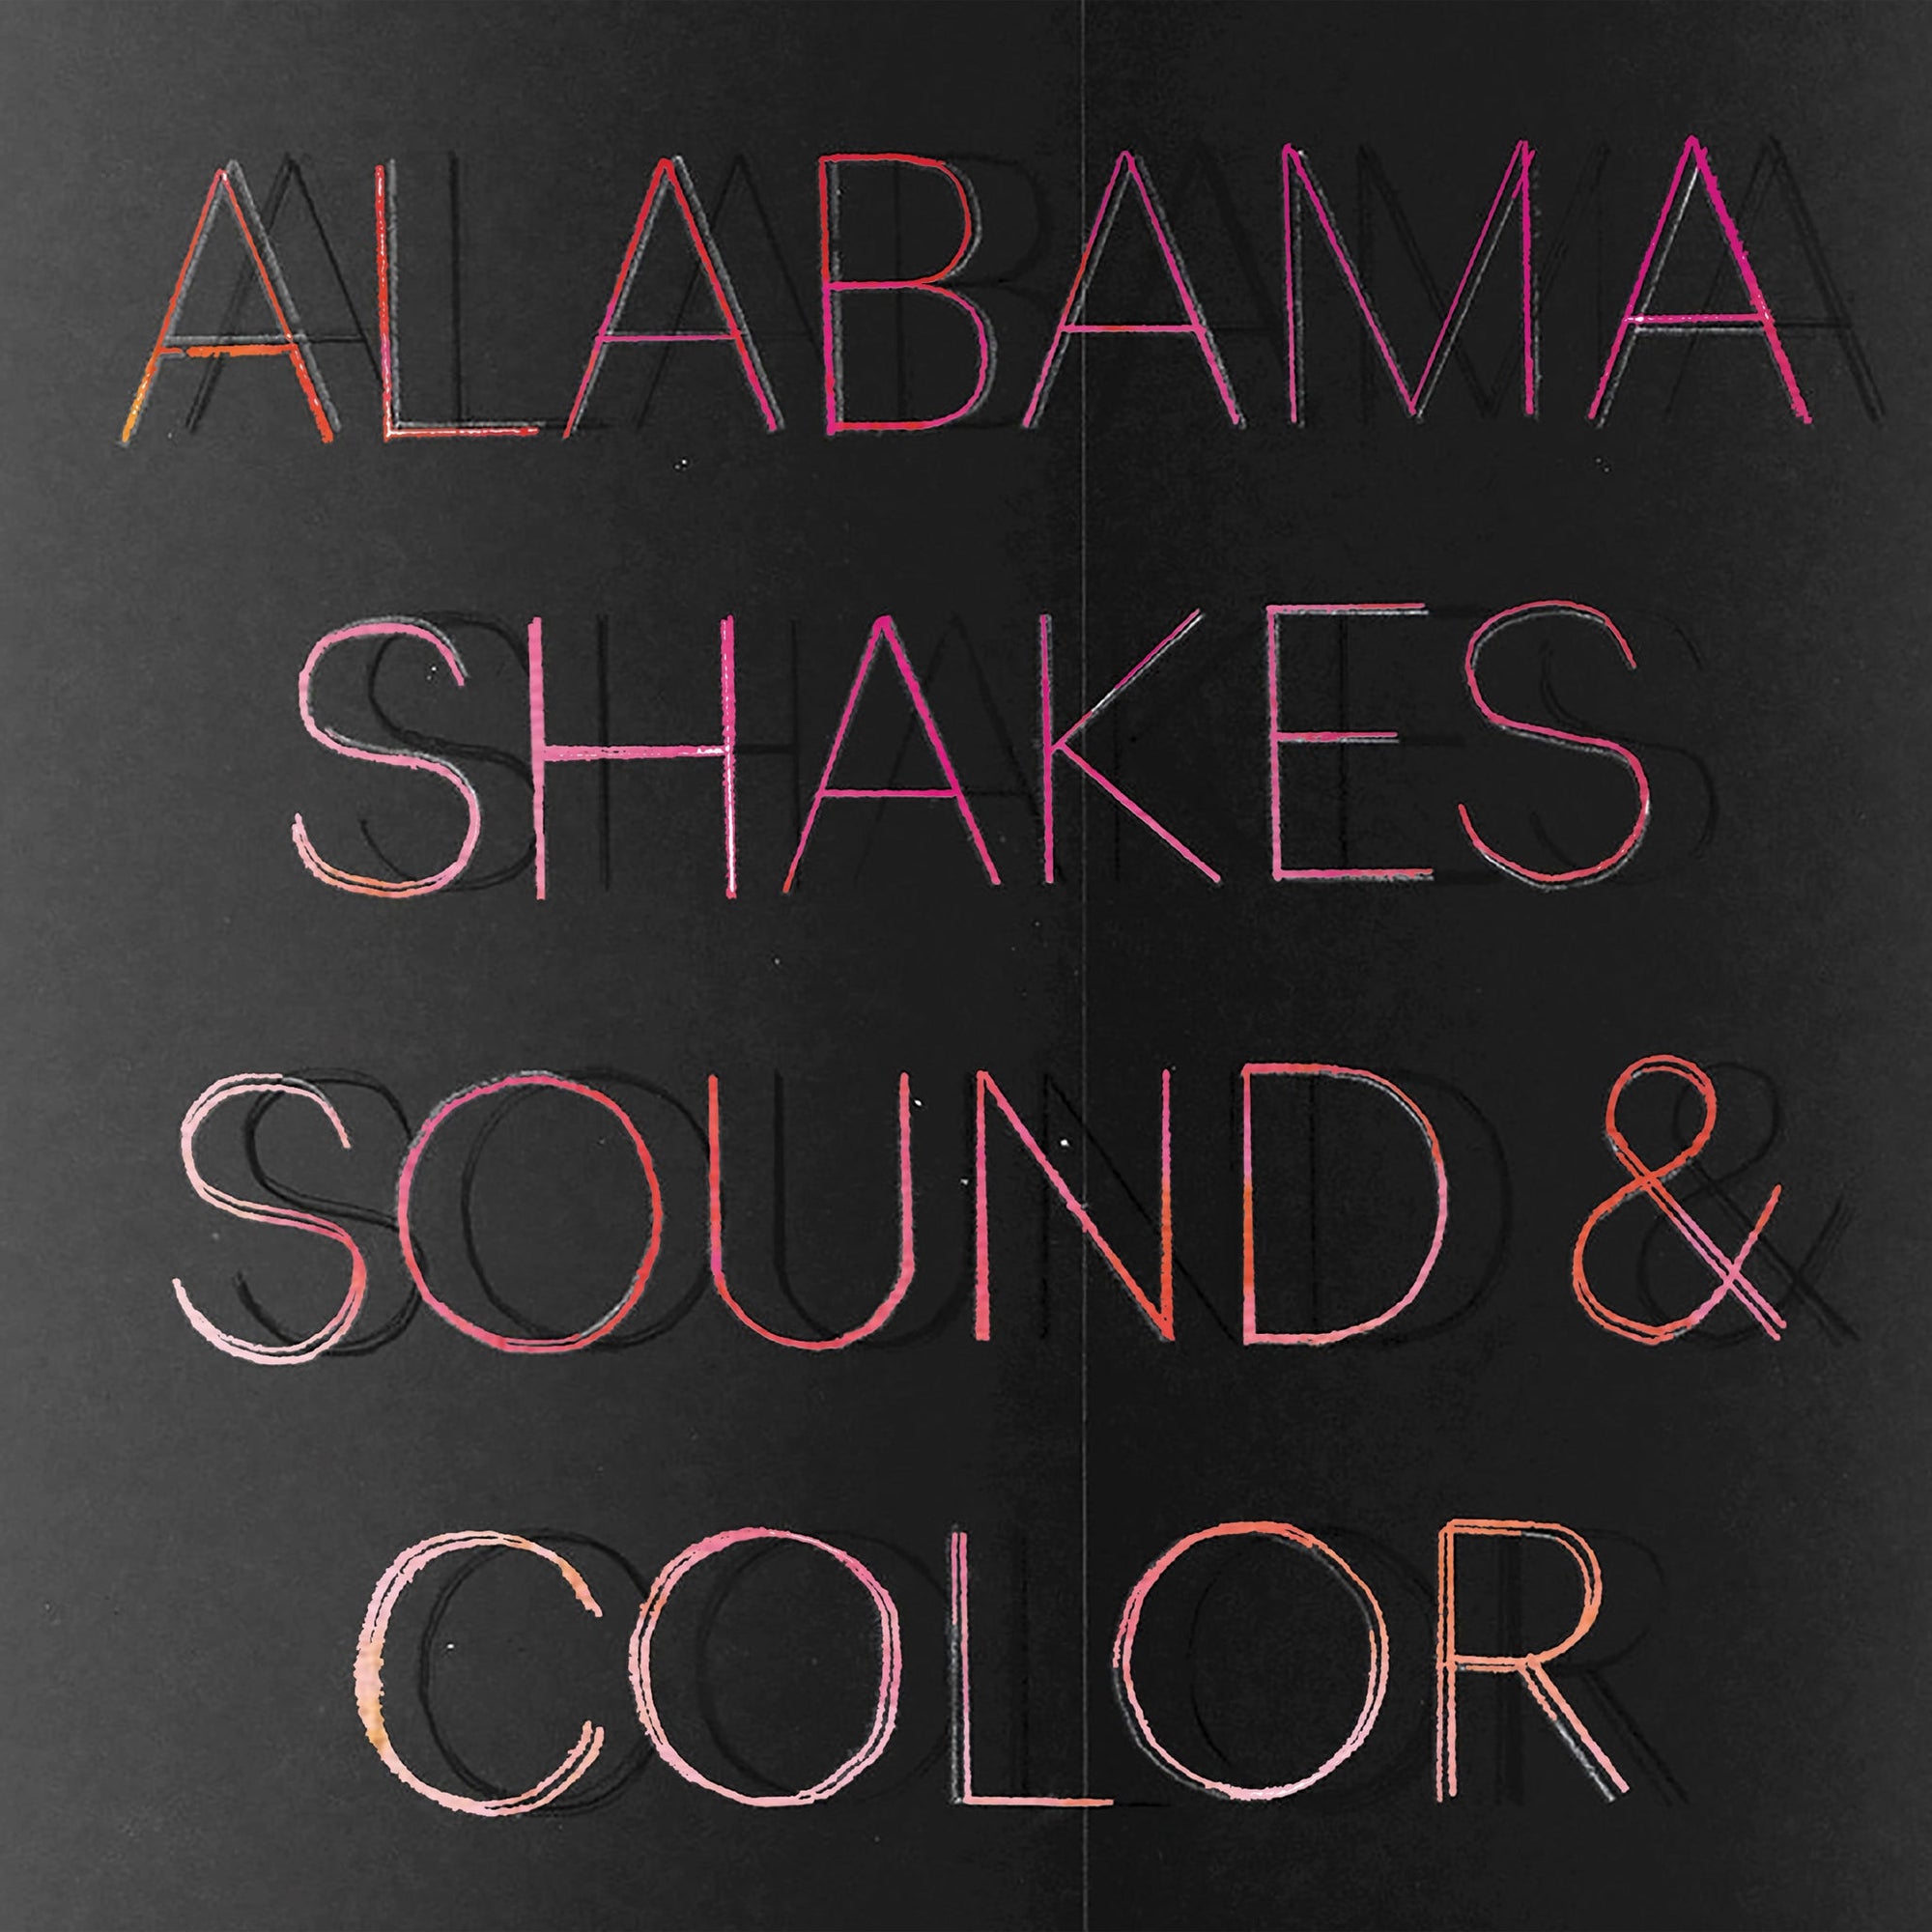 Alabama Shakes - Sound and Color Deluxe Edition (Vinyl 2LP)